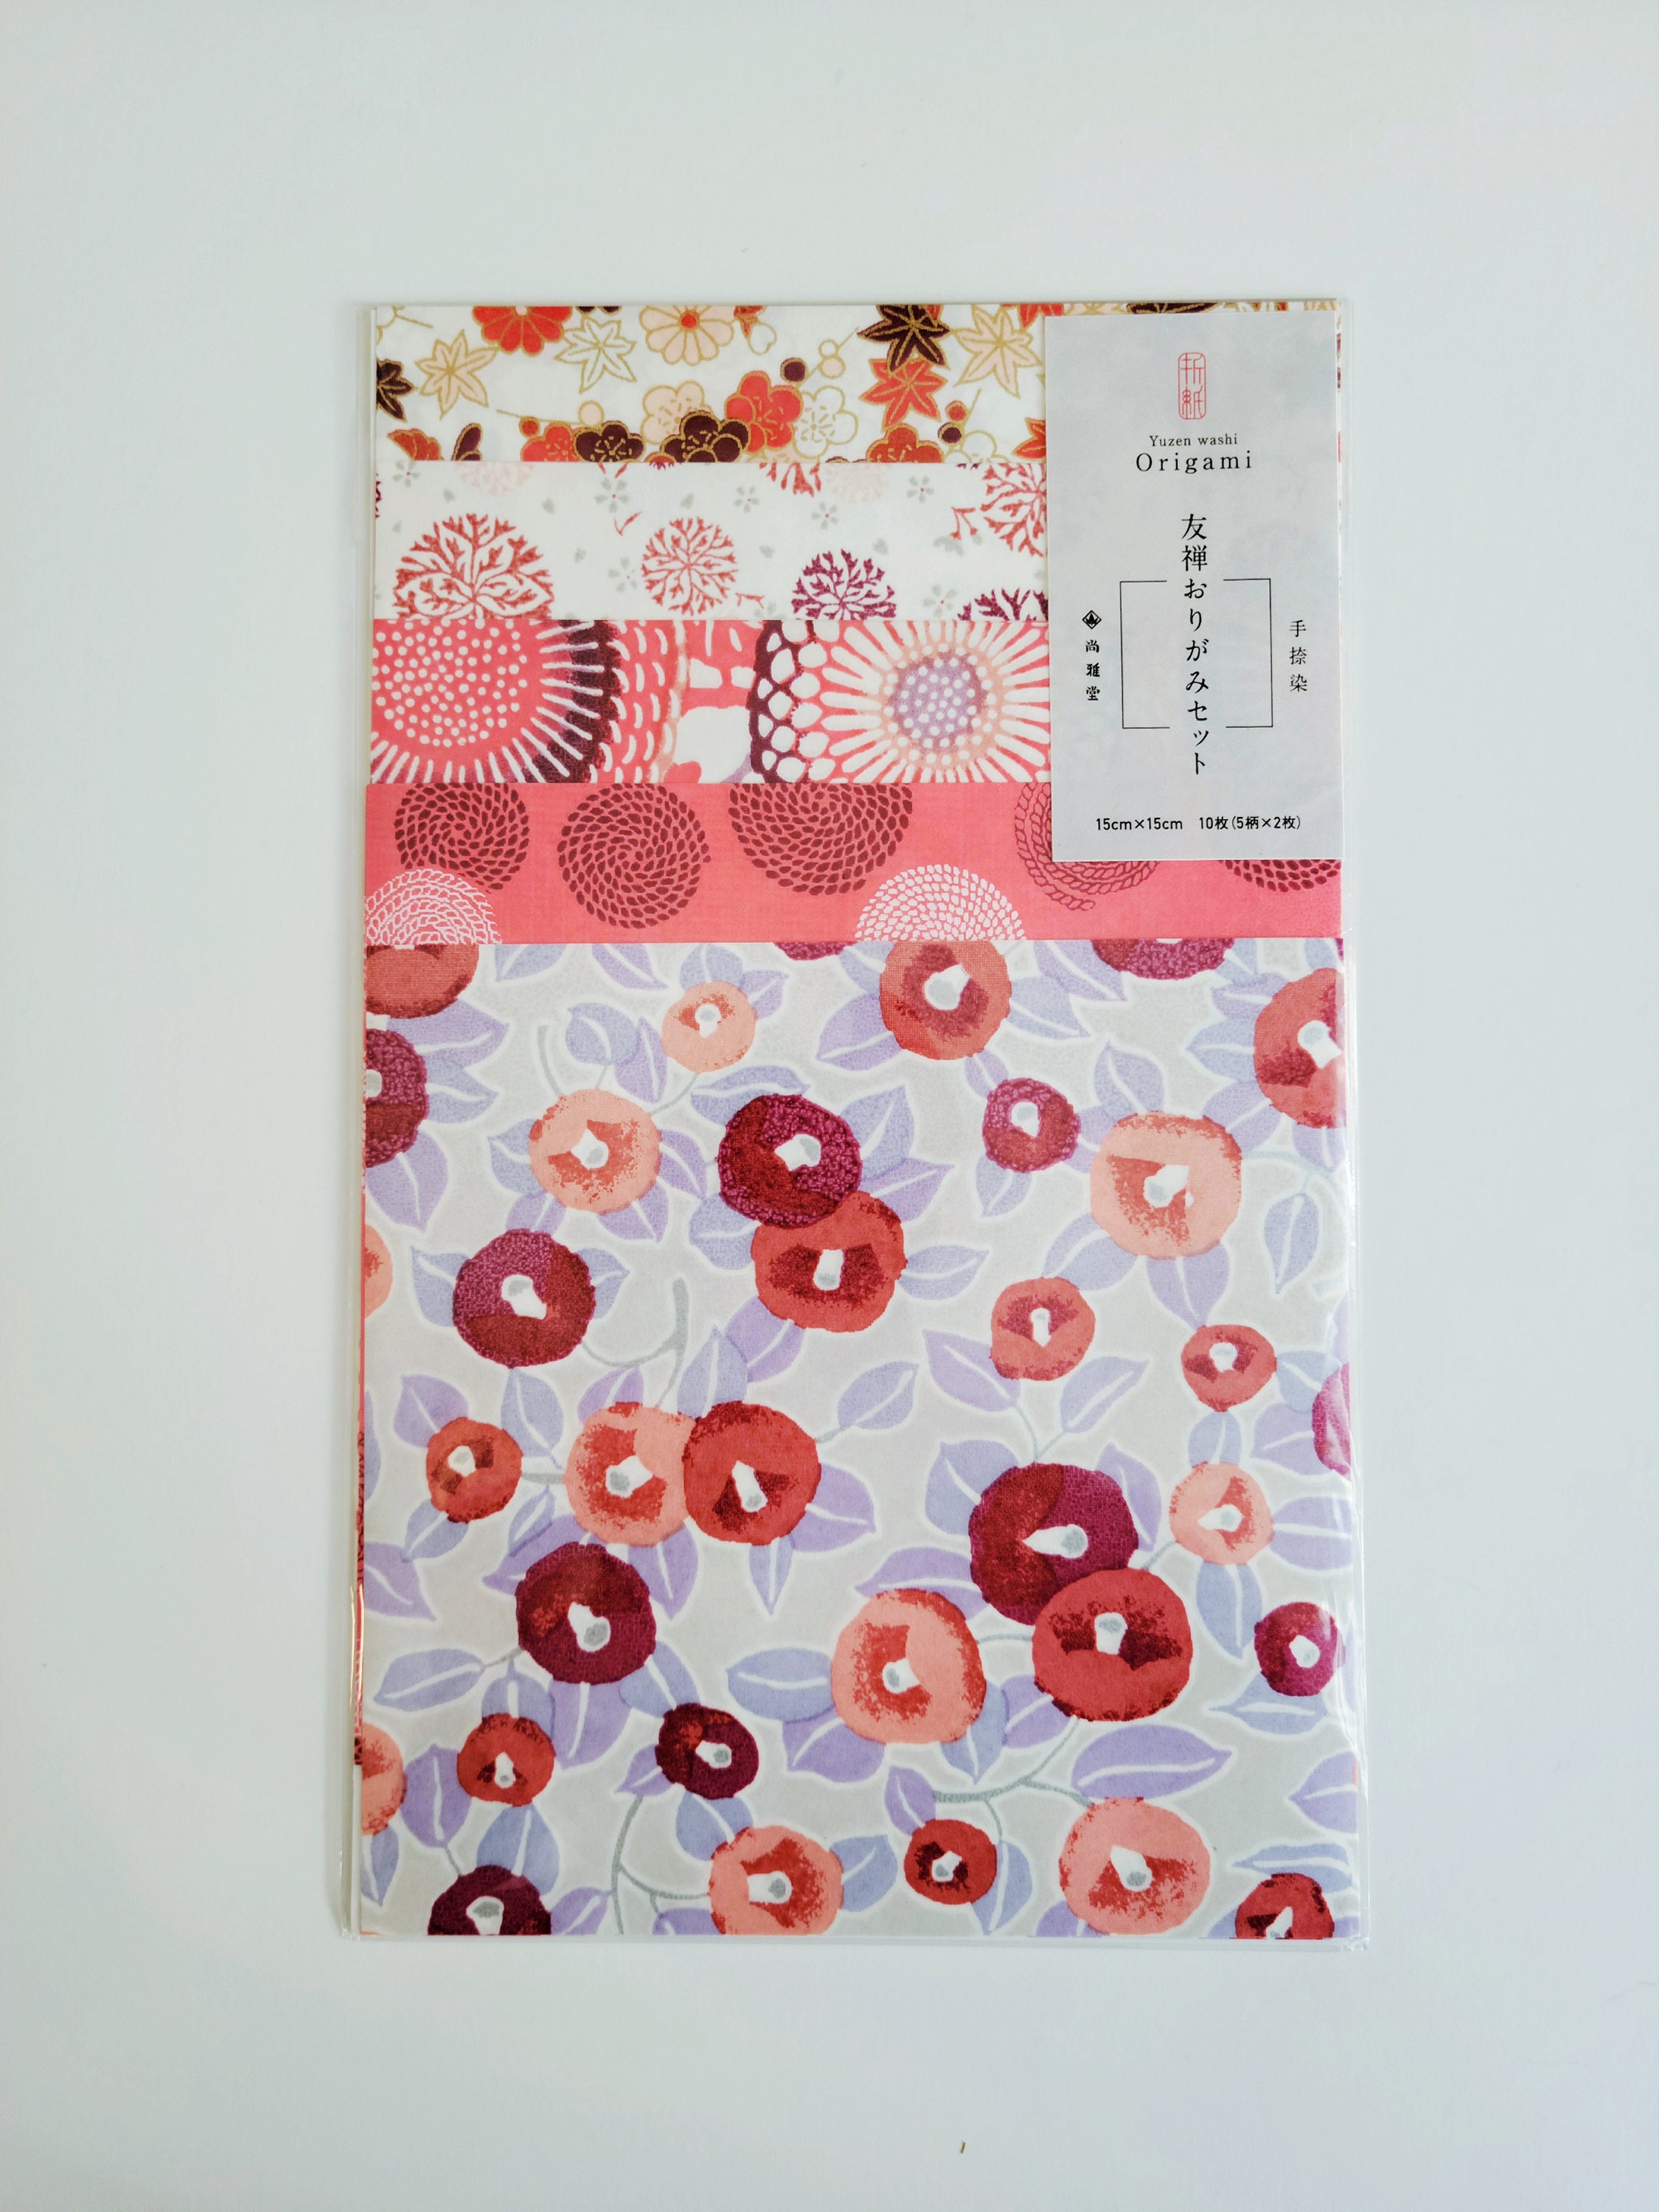 Origami Paper Washi 10-Shades of Red 6